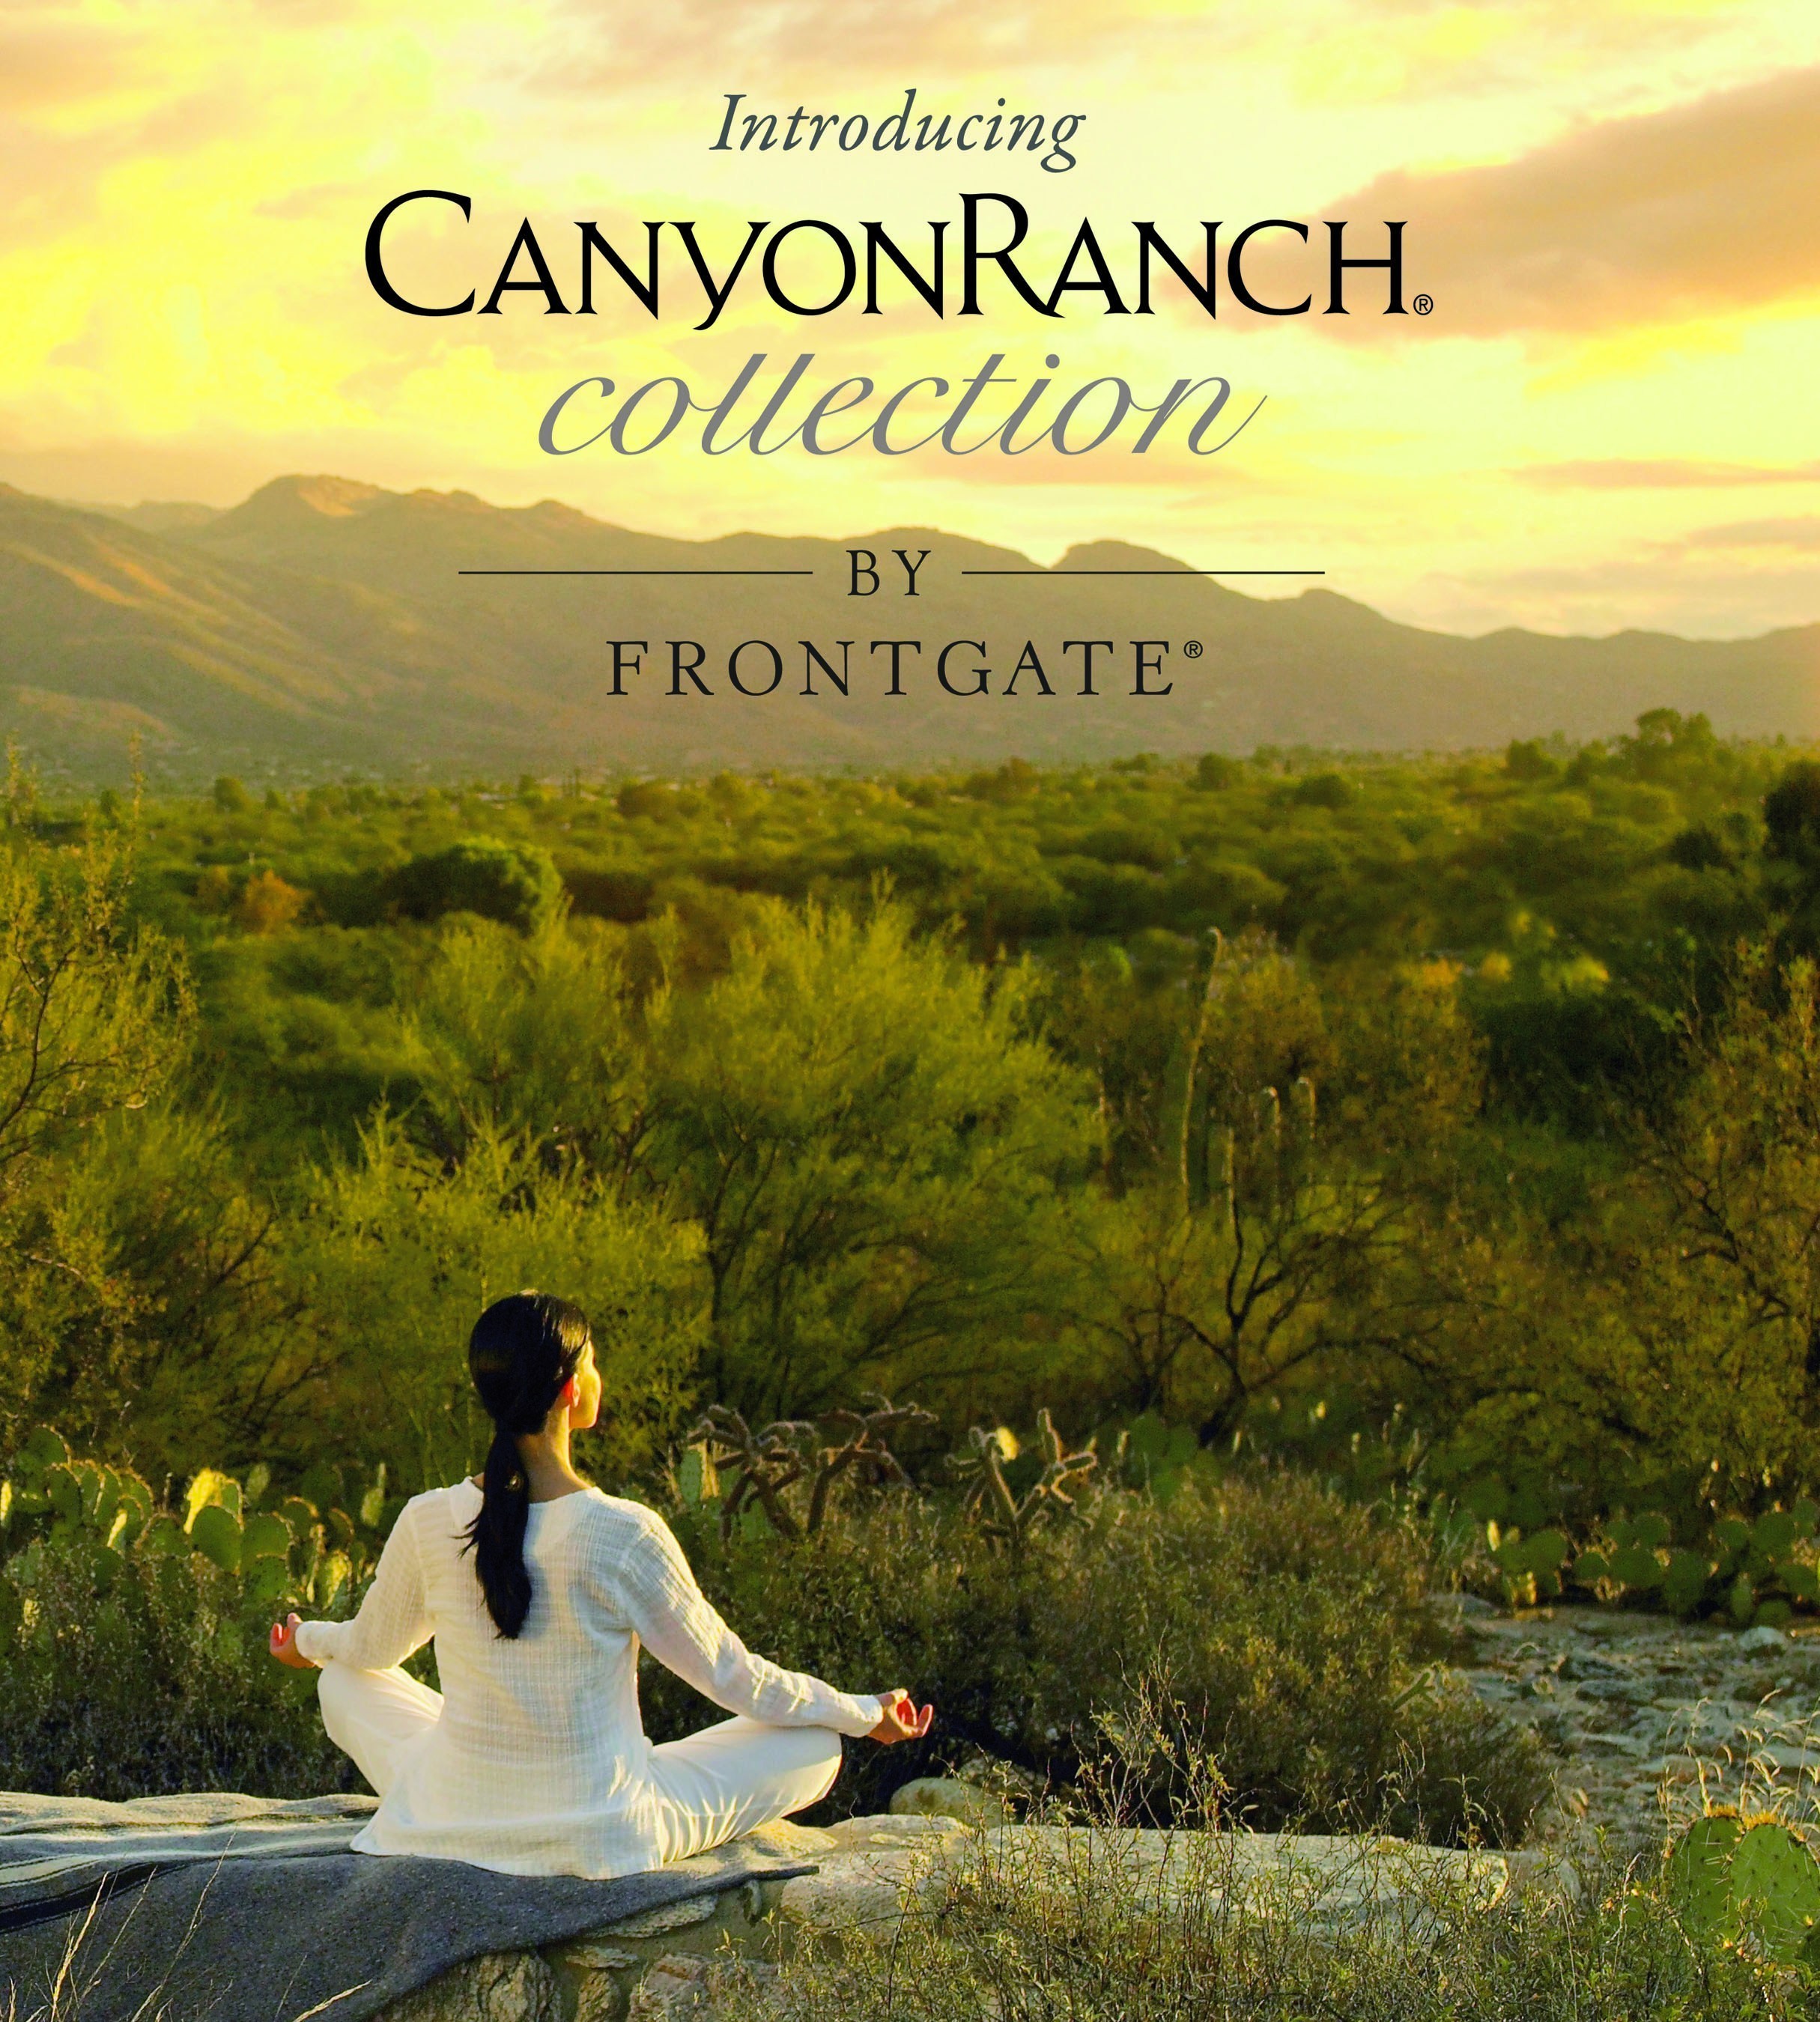 Frontgate, a leading home luxury lifestyle retailer, and Canyon Ranch, one of the world's foremost health and wellness brands, announced today a partnership to bring life-enriching products to homes around the world.